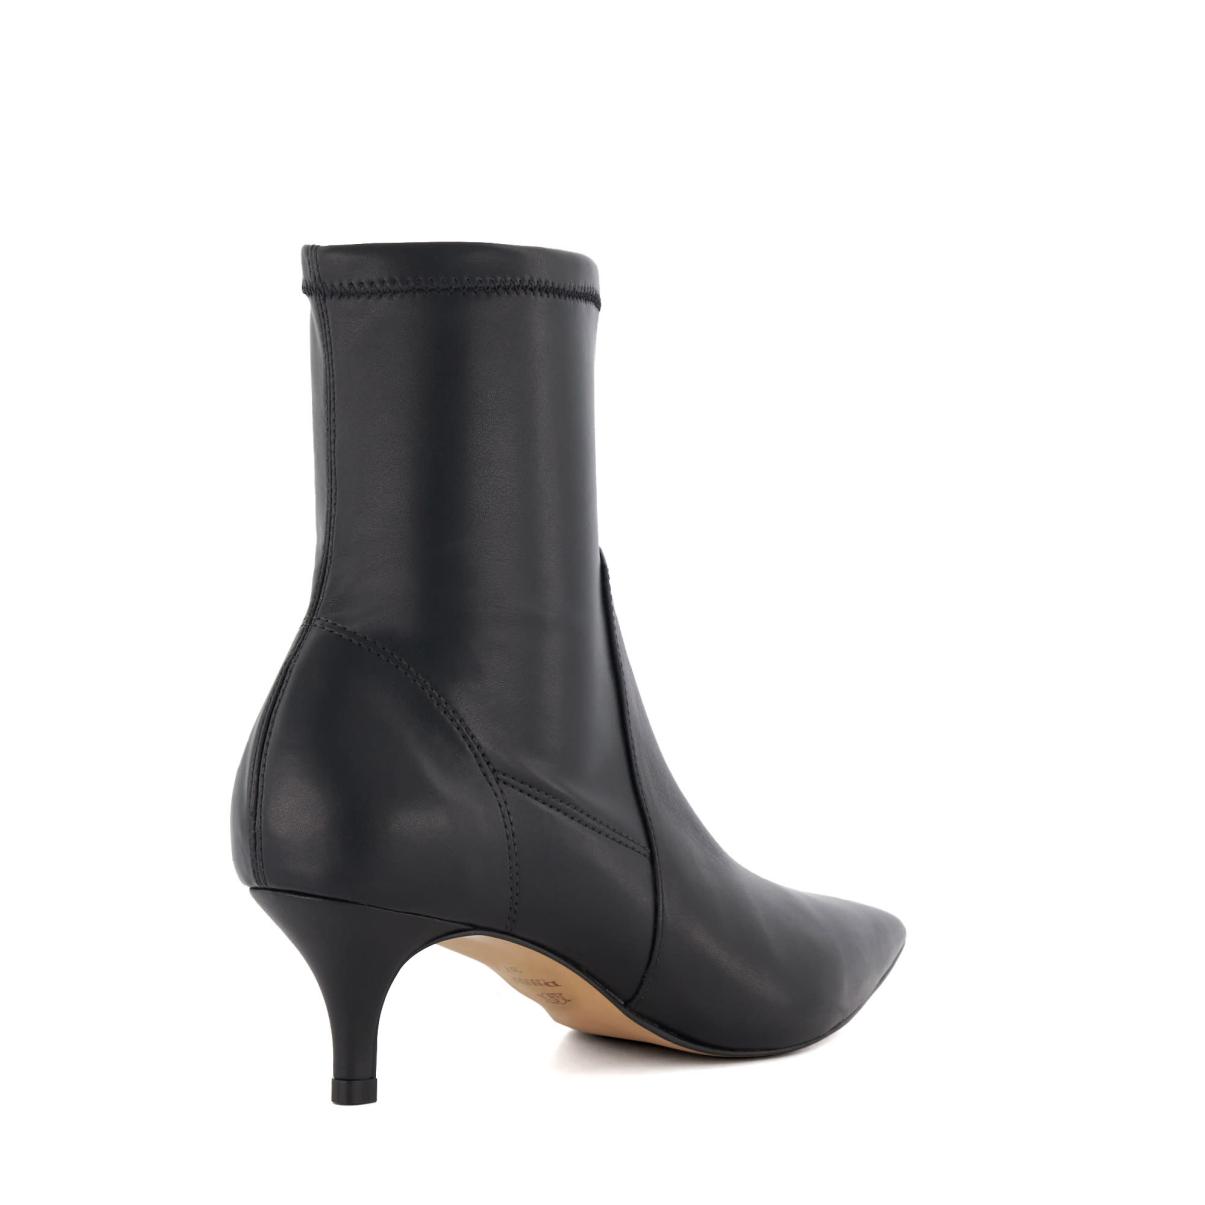 Ankle Boots Women Origami - Black Dune London - 5